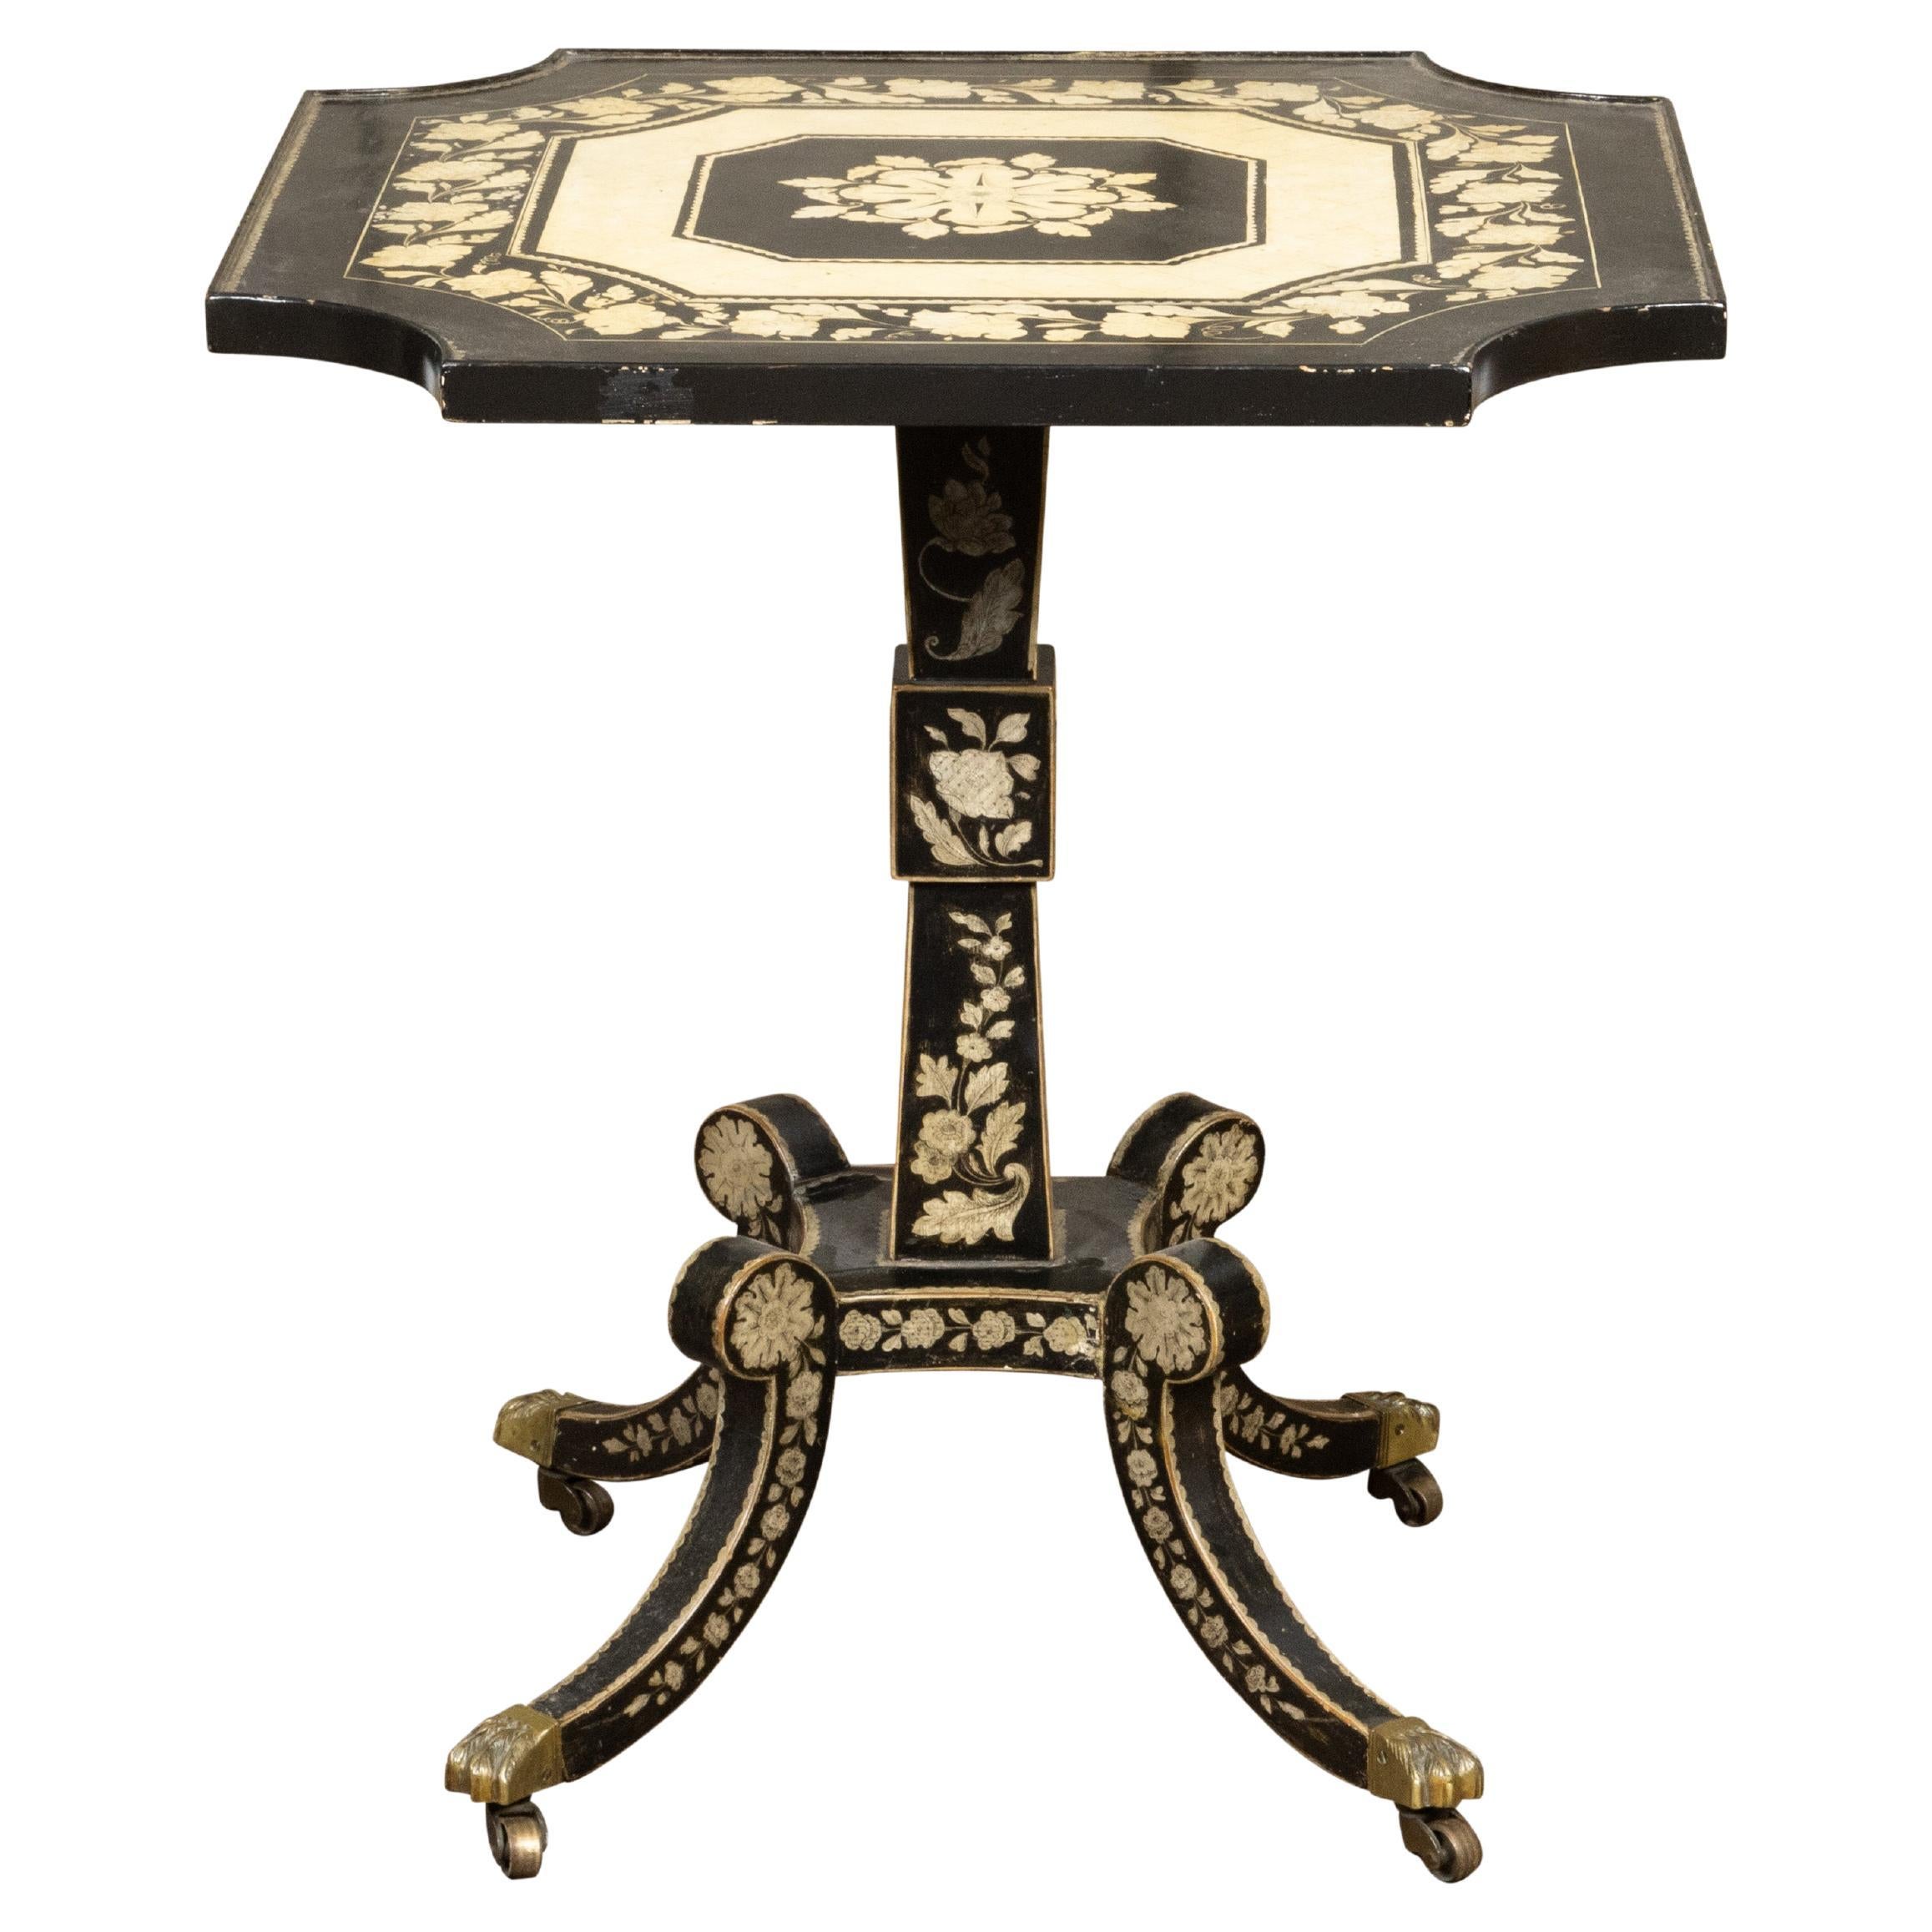 English Regency Penwork Occasional Table with Floral Décor and Curving Legs